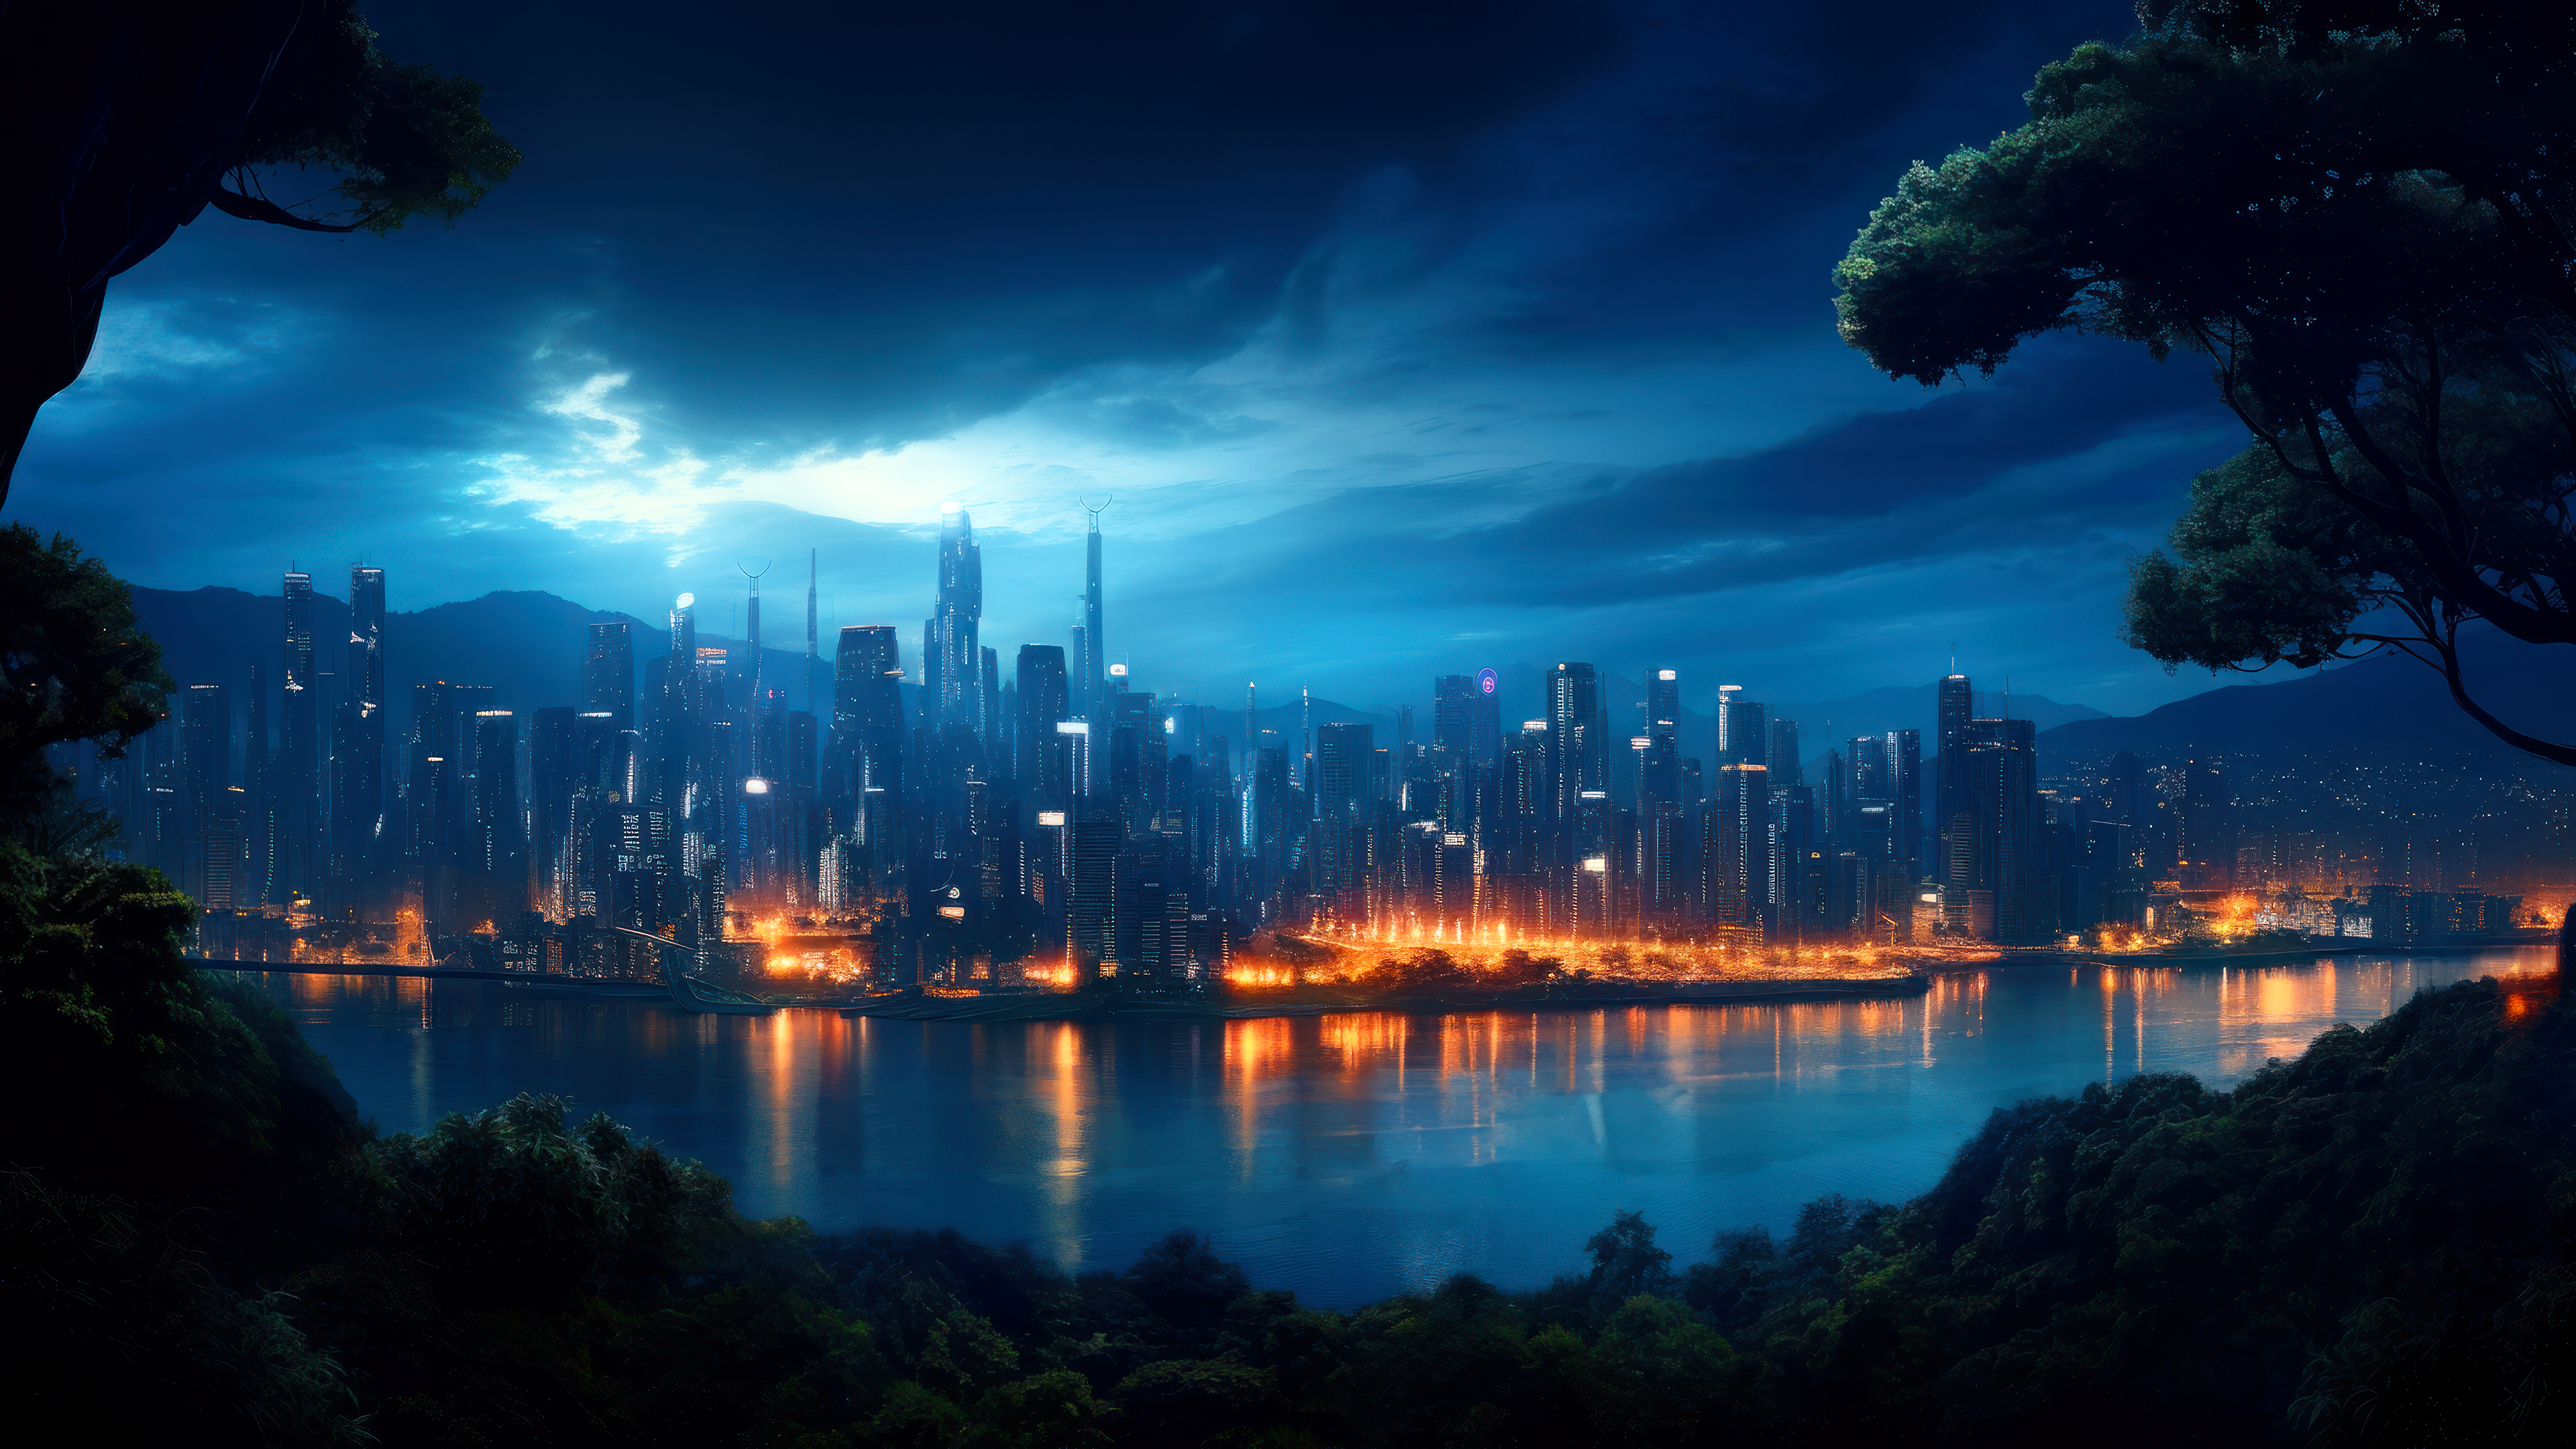 General 3840x2160 AI art cityscape city sky clouds water nightscape digital art building skyscraper city lights reflection mountains